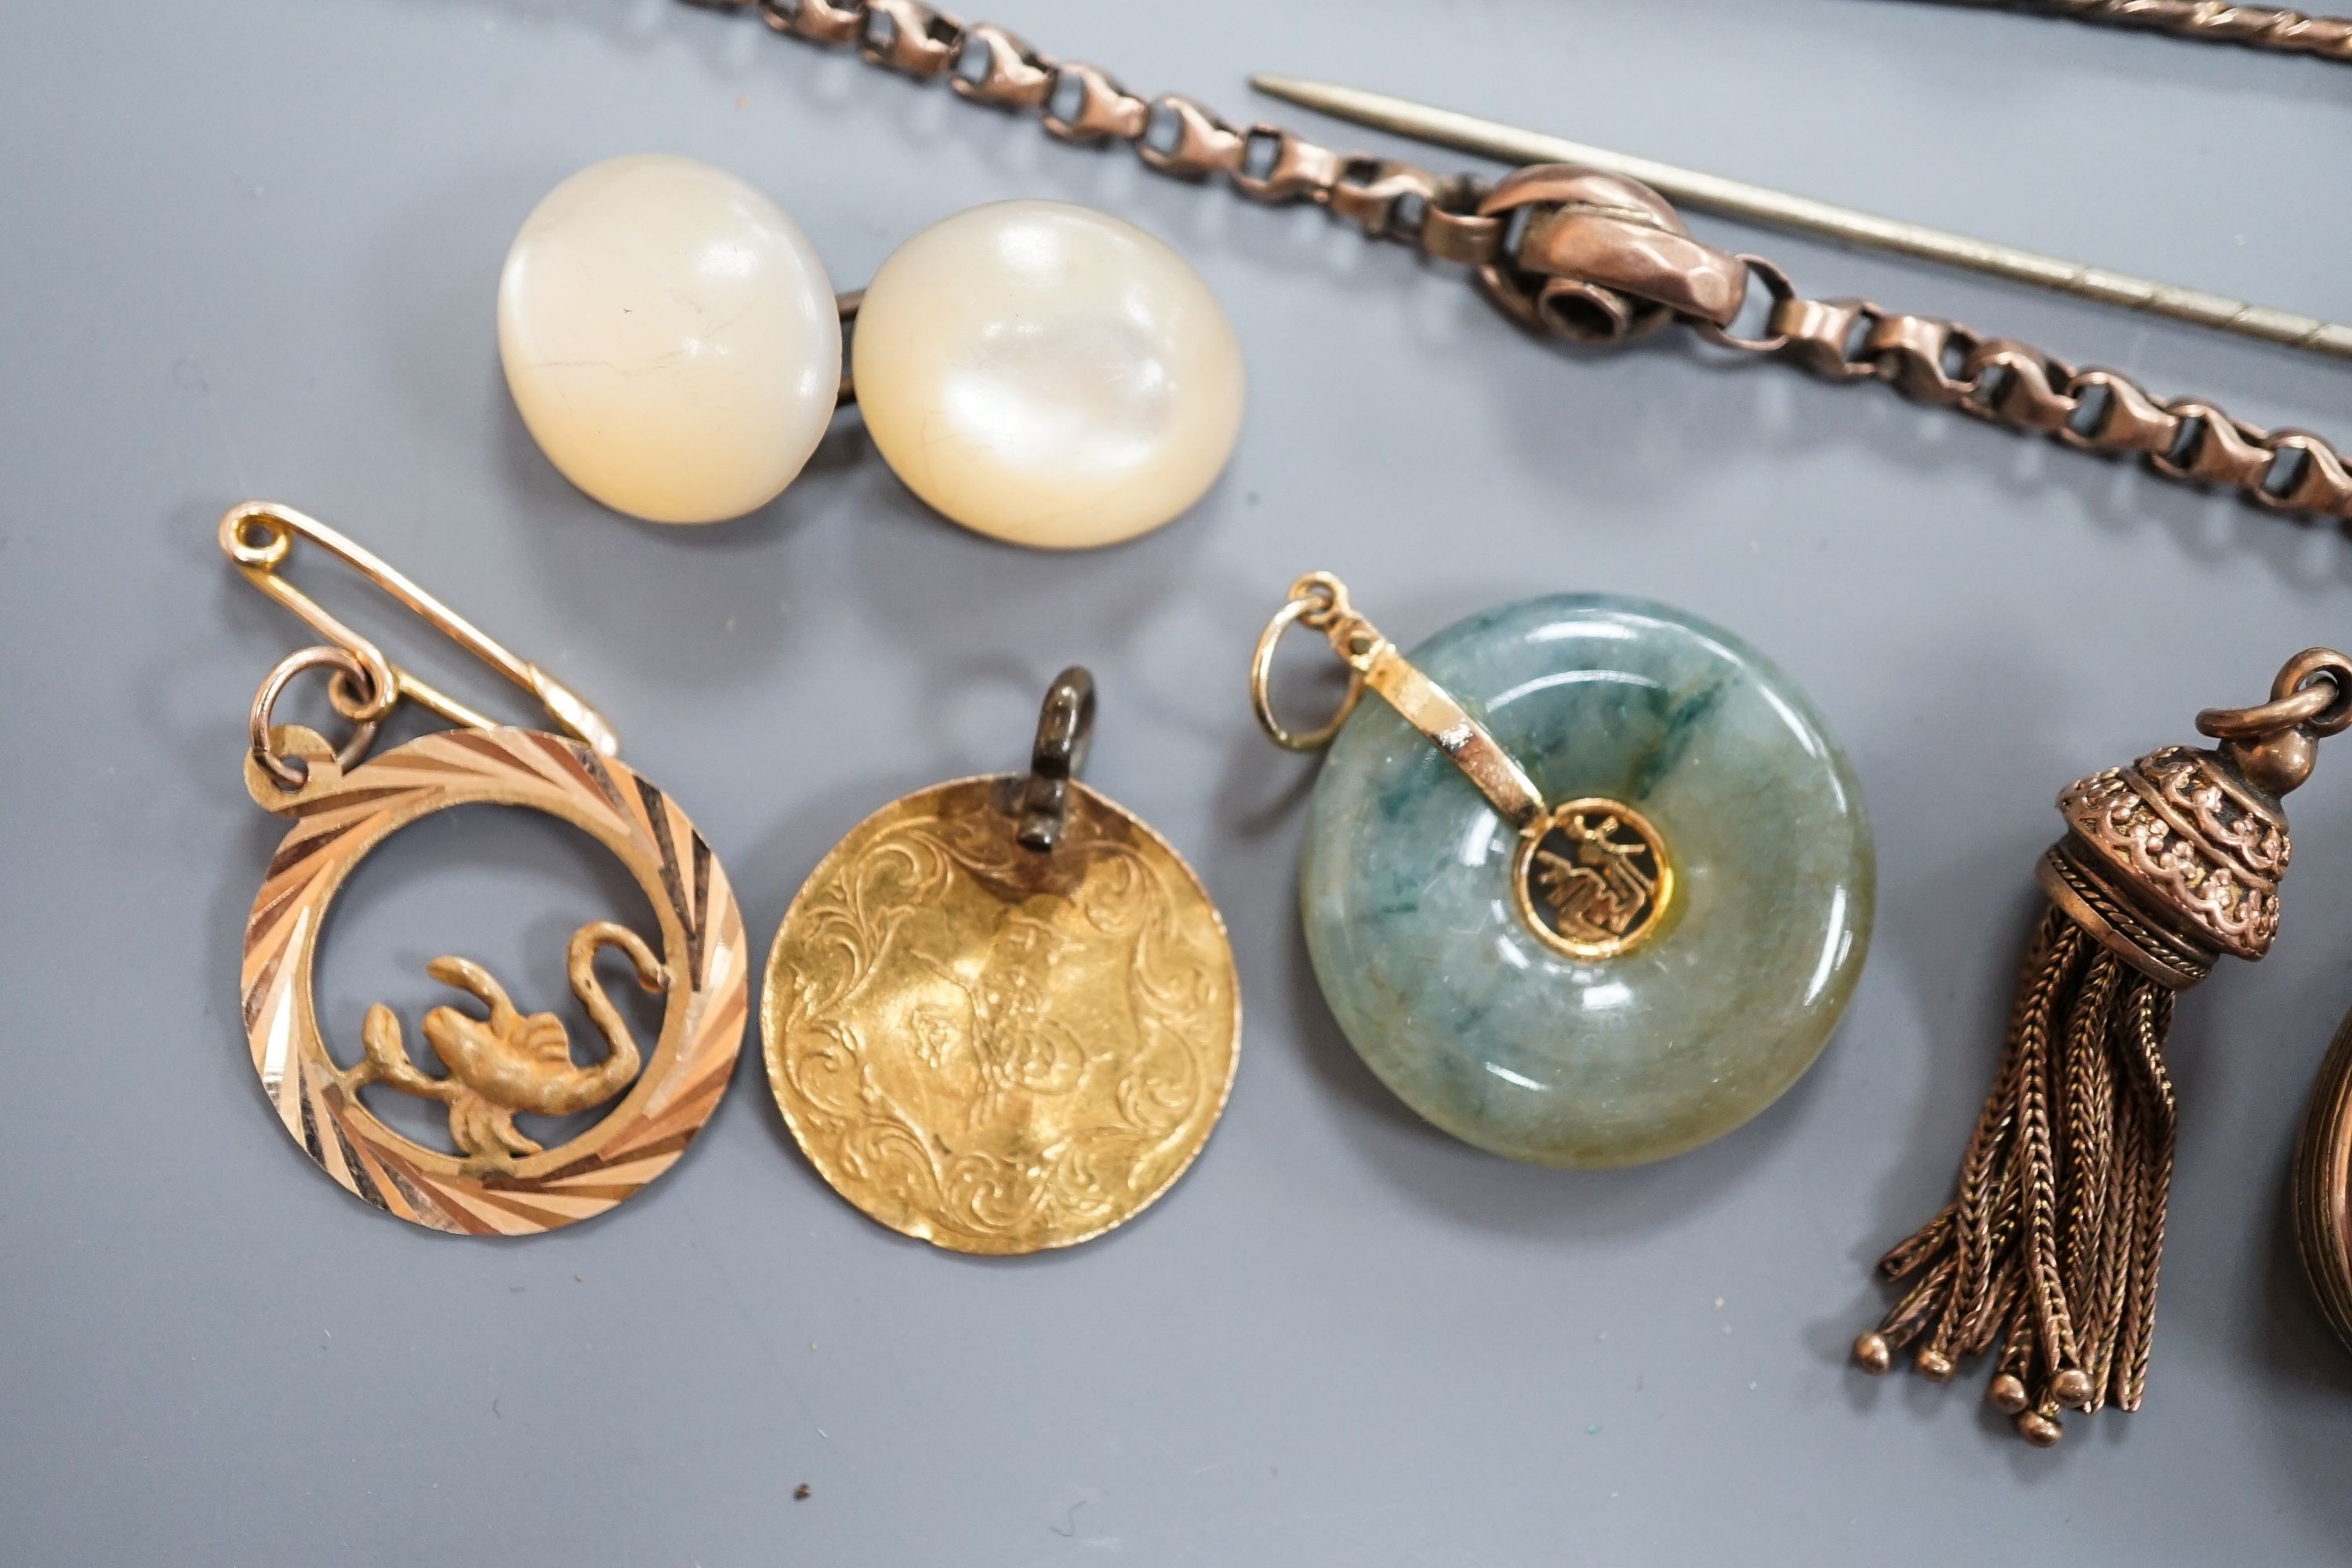 Minor jewellery including a 9ct chain(a.f.), 11.7 grams, a Persian gold coin pendant, gross 2 grams, a yellow metal pendent stamped '14', 1.8 grams and other jewellery including a jade pendant, two stick pins, cased butt